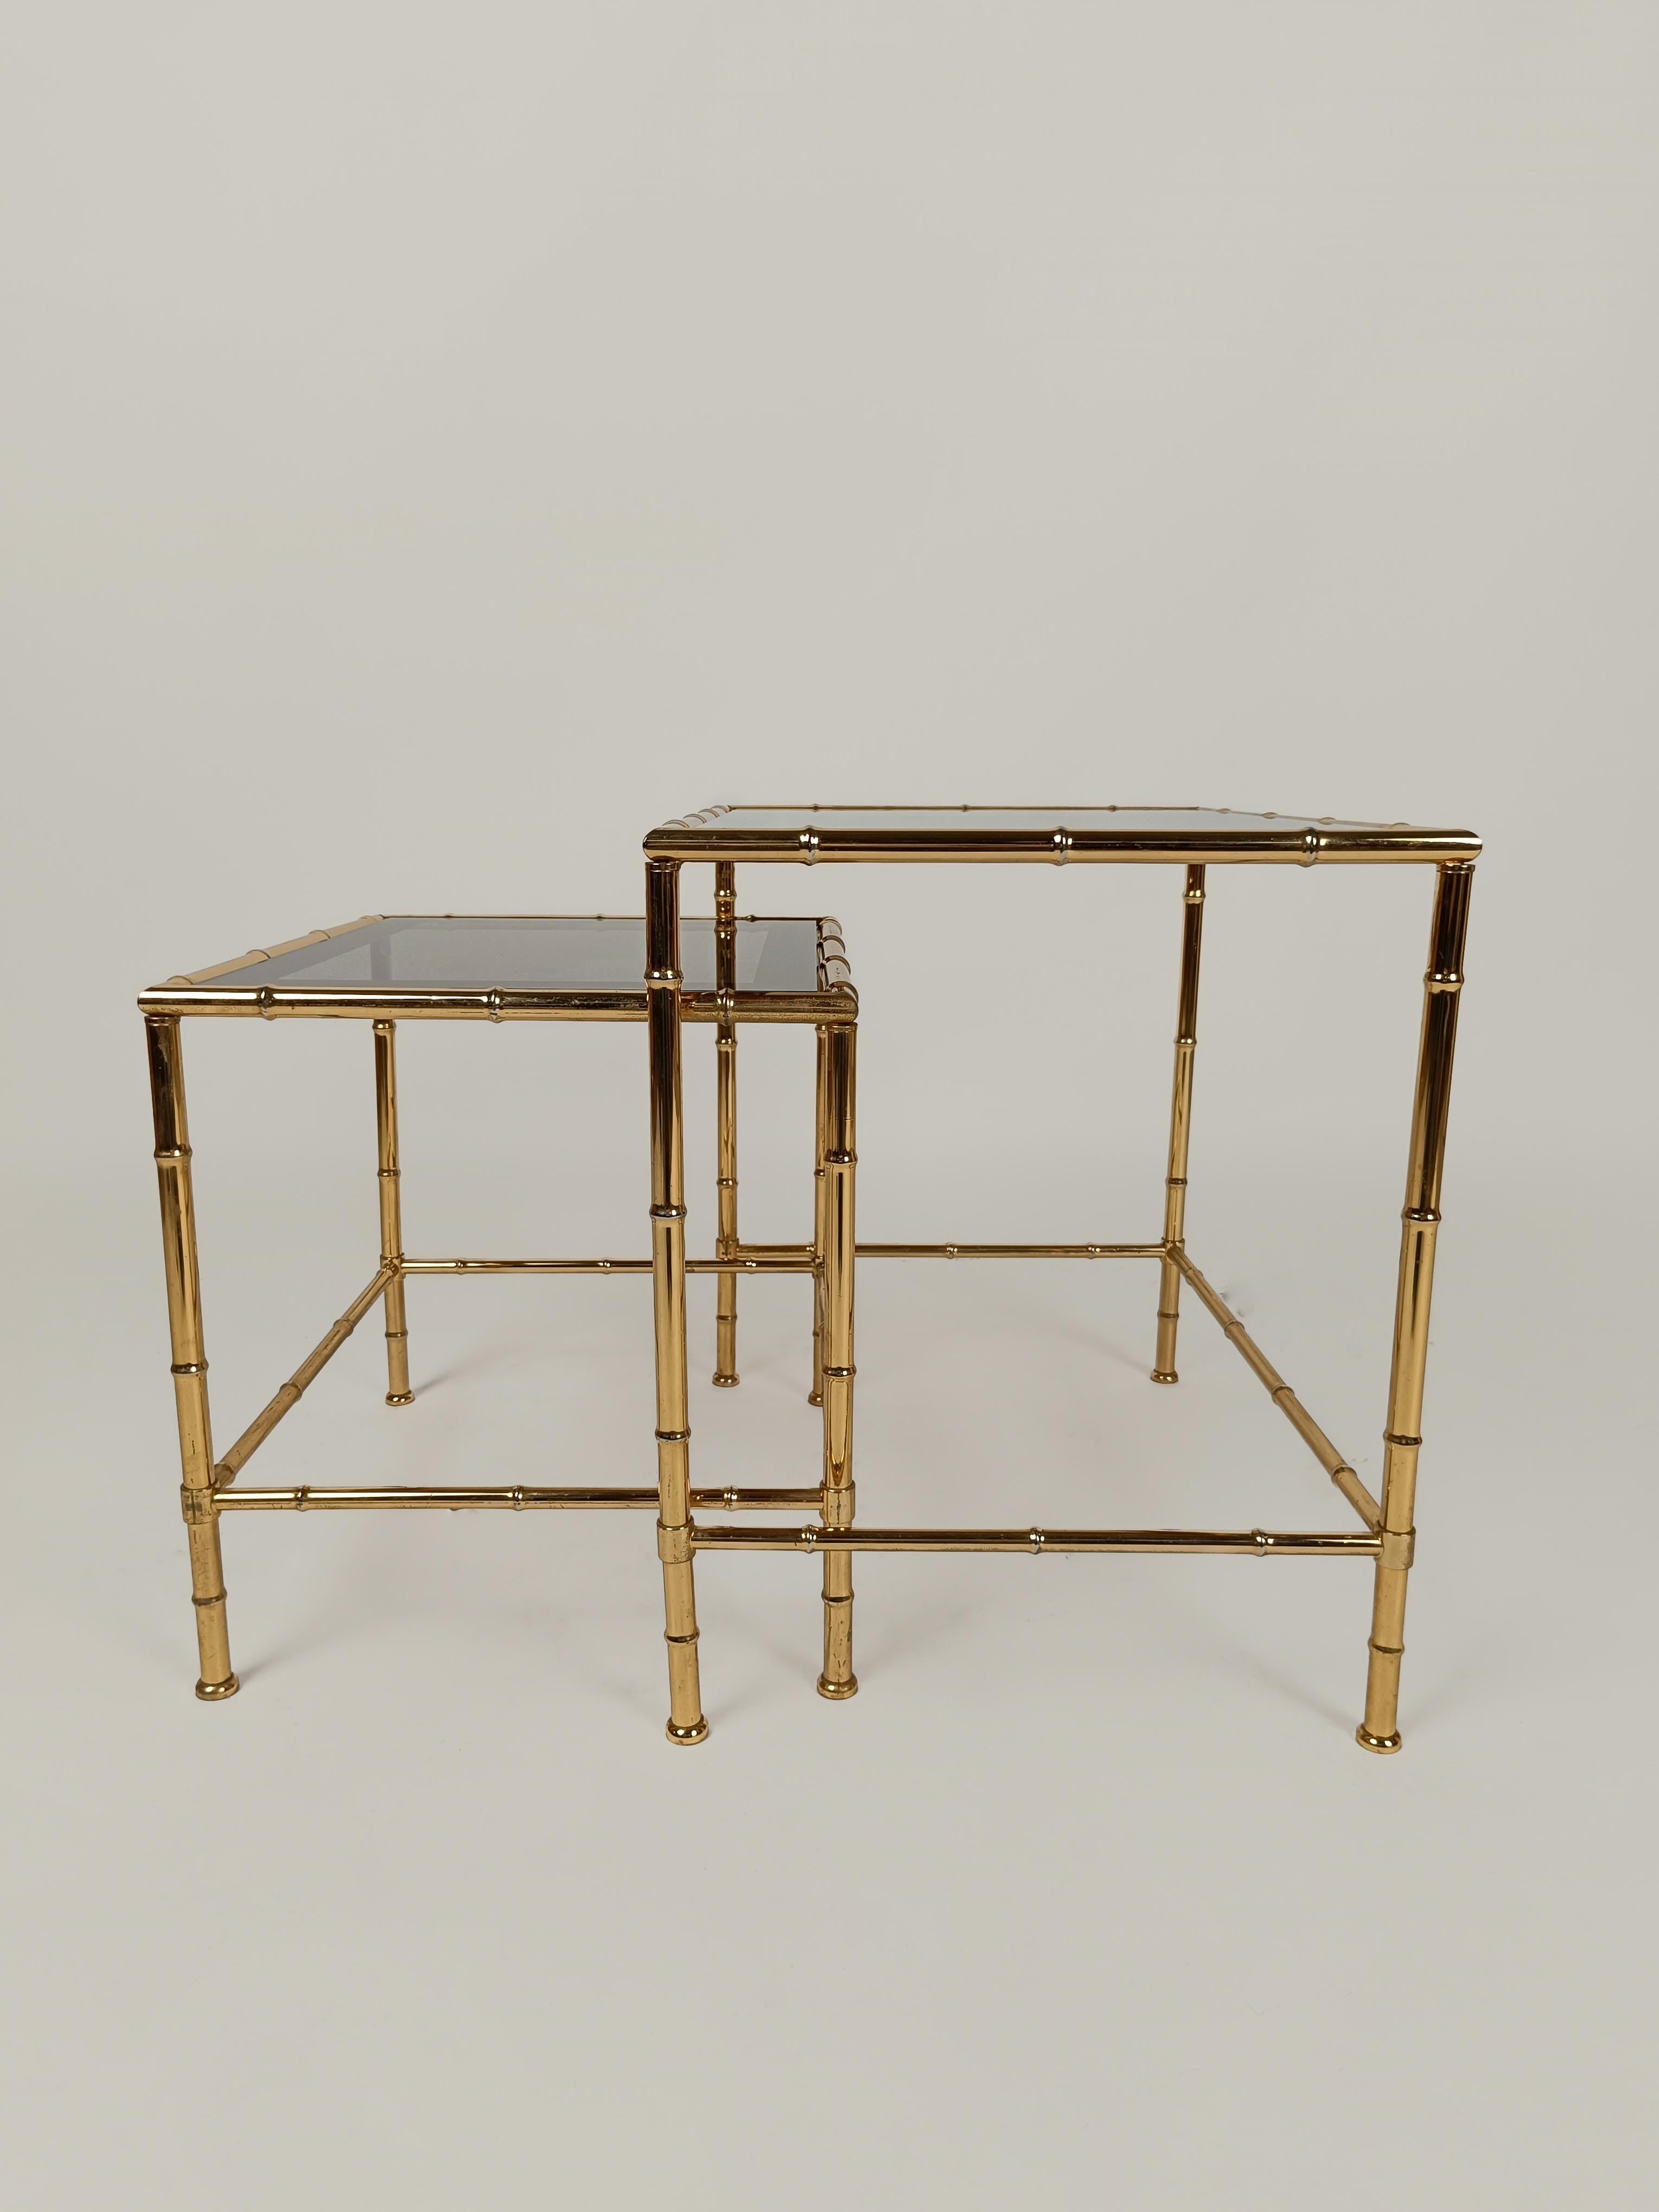 Italiano Midcentury Nesting Table in Brass Faux Bamboo and Fumè Mirrored Glass For Sale 4